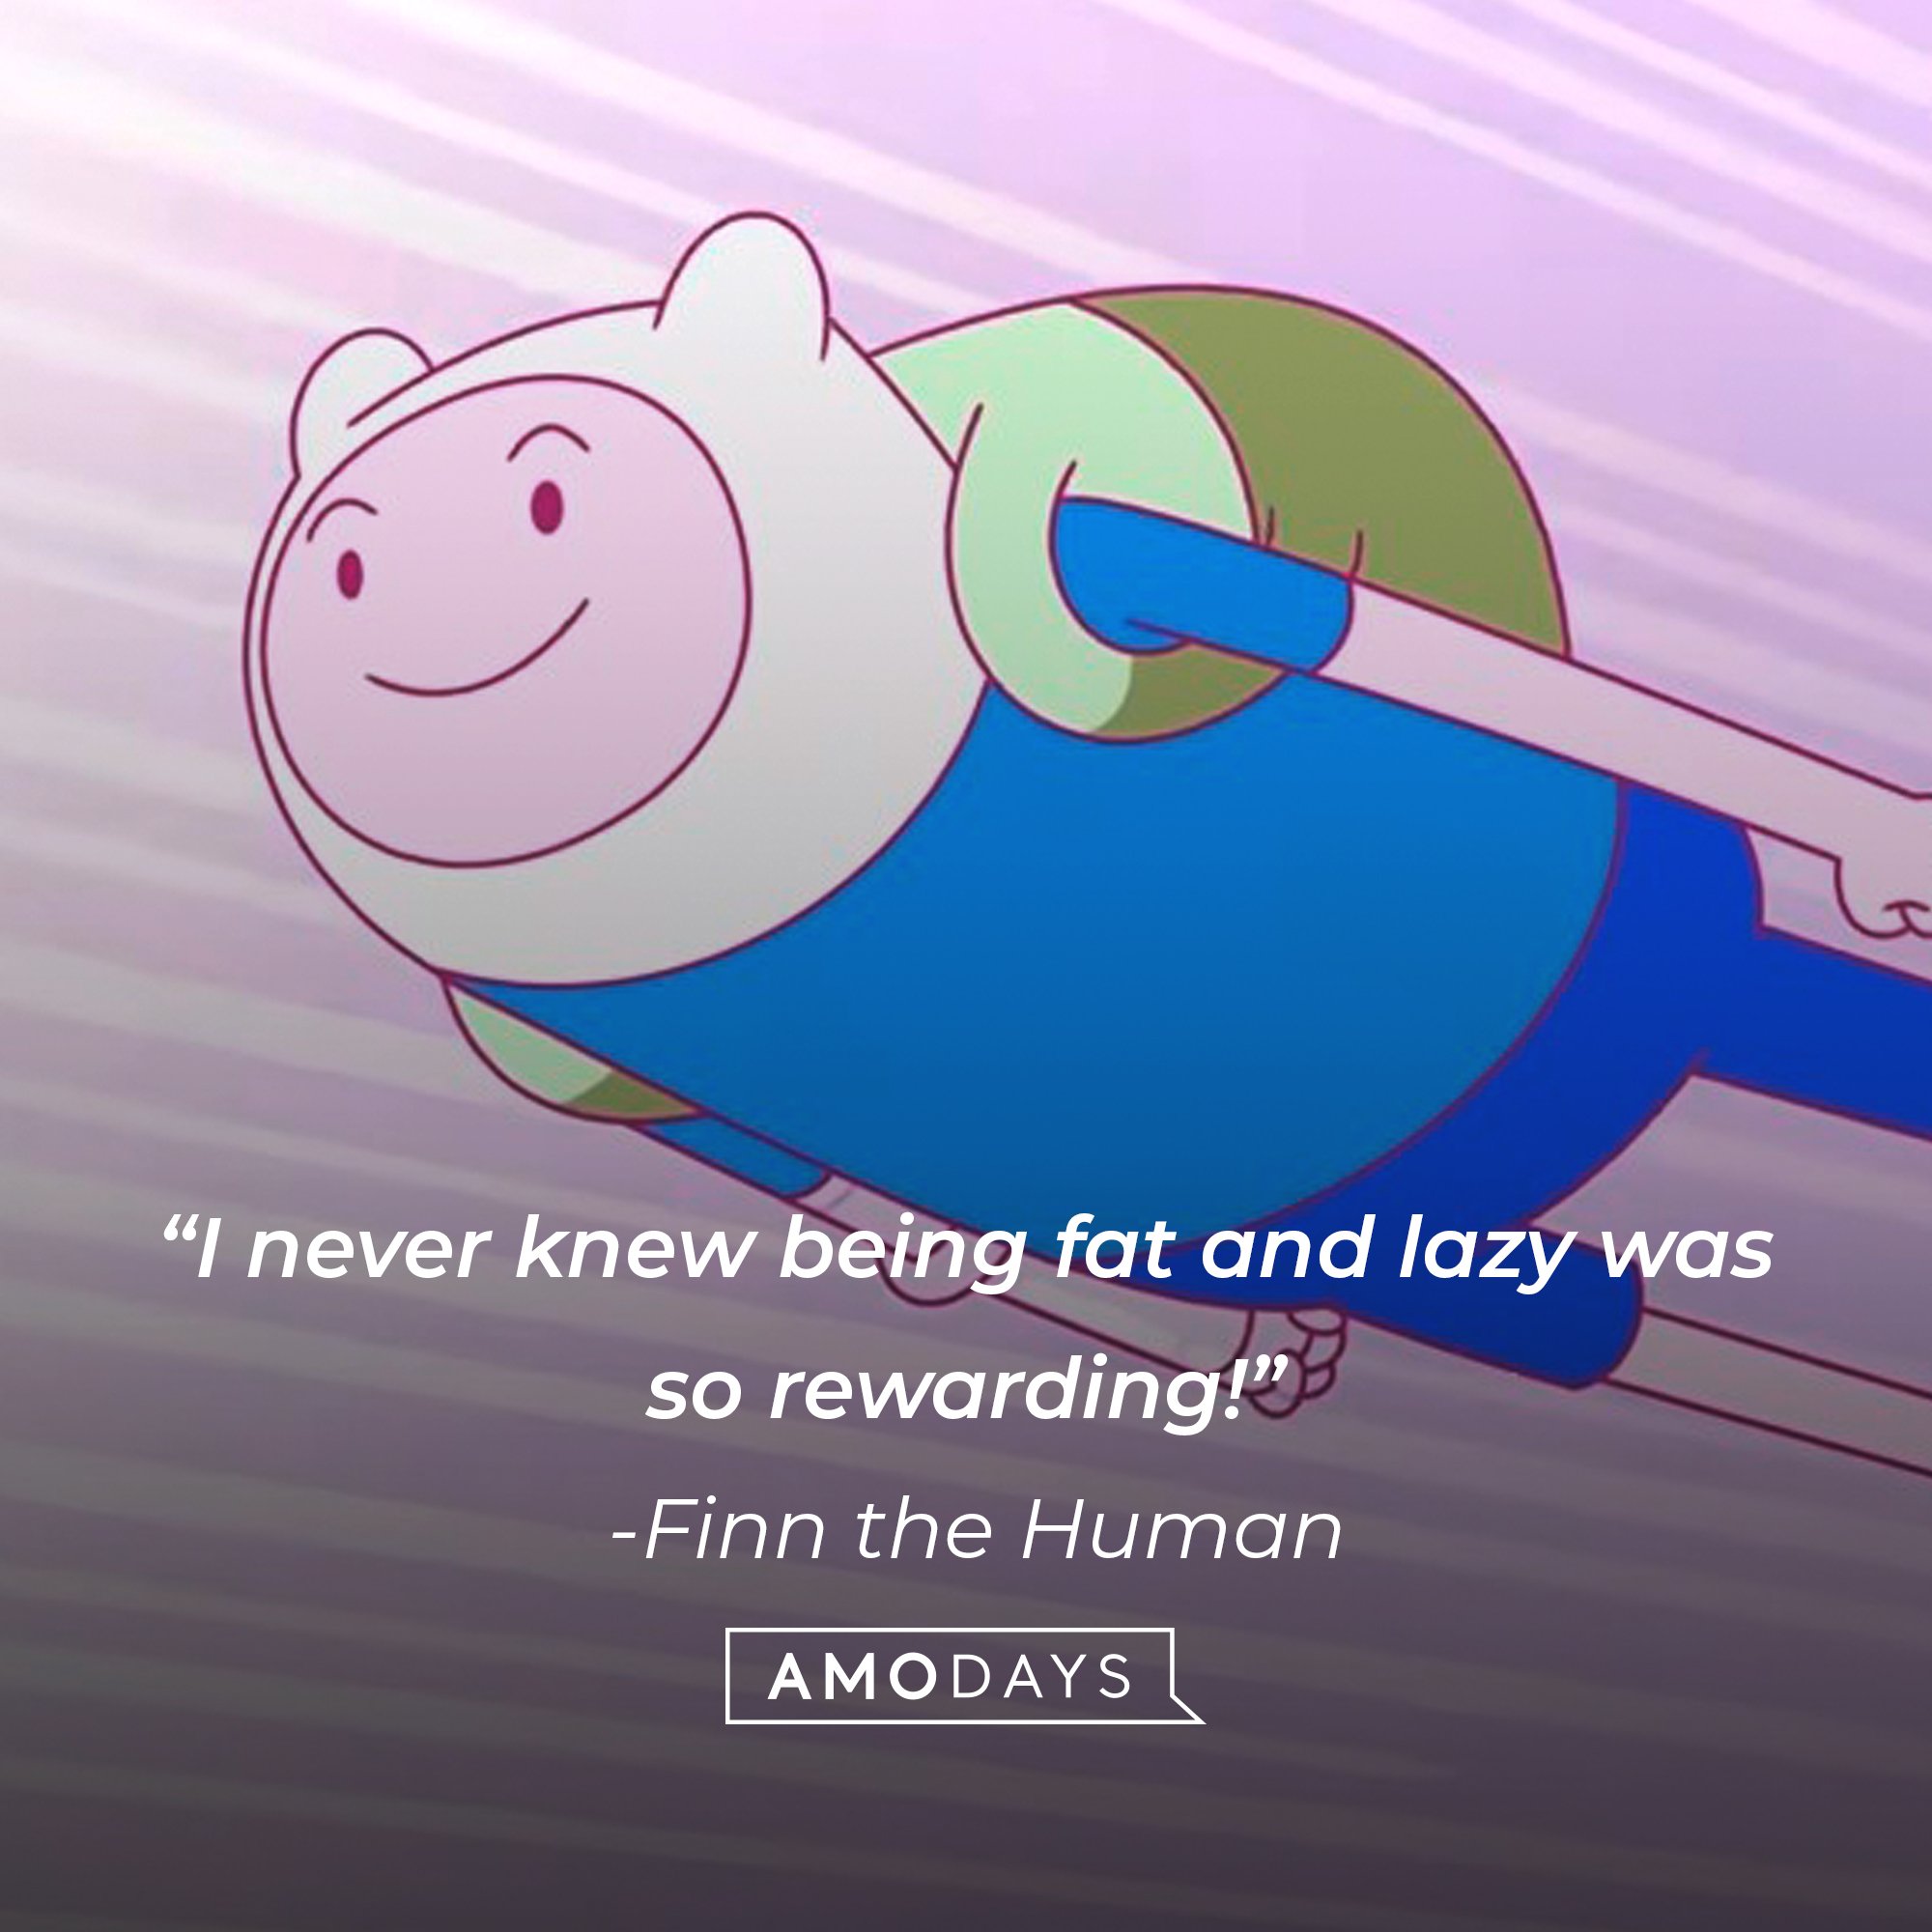  Finn the Human’s quote: “I never knew being fat and lazy was so rewarding!” | Image: AmoDays